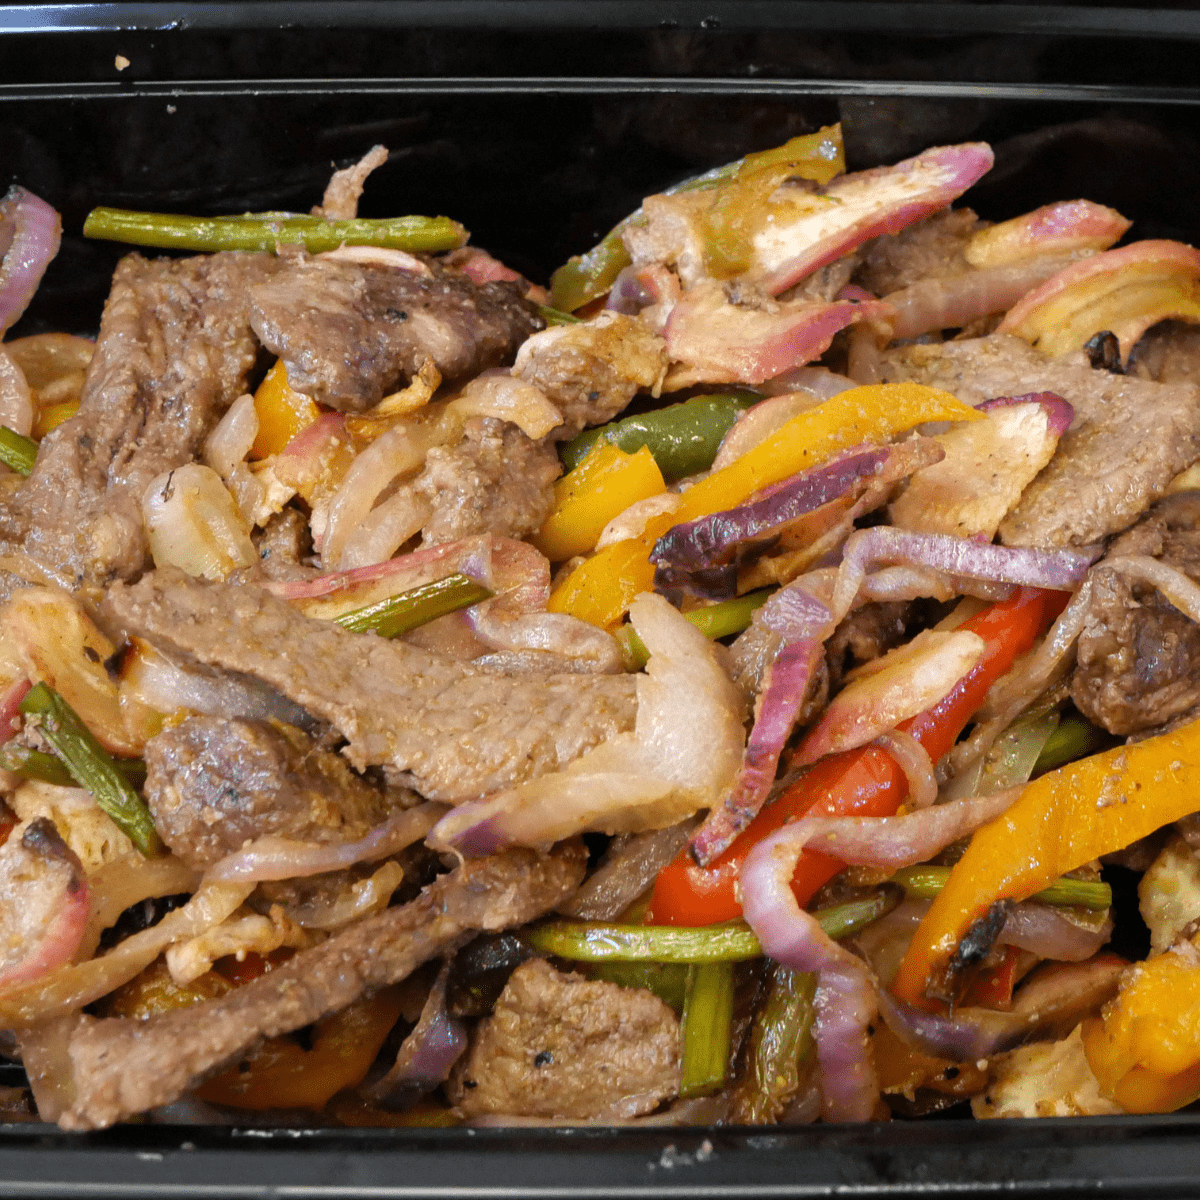 Steak and Veggie Stir Fry is a regular in our kitchen. It's delicious and loved by both kids and adults.